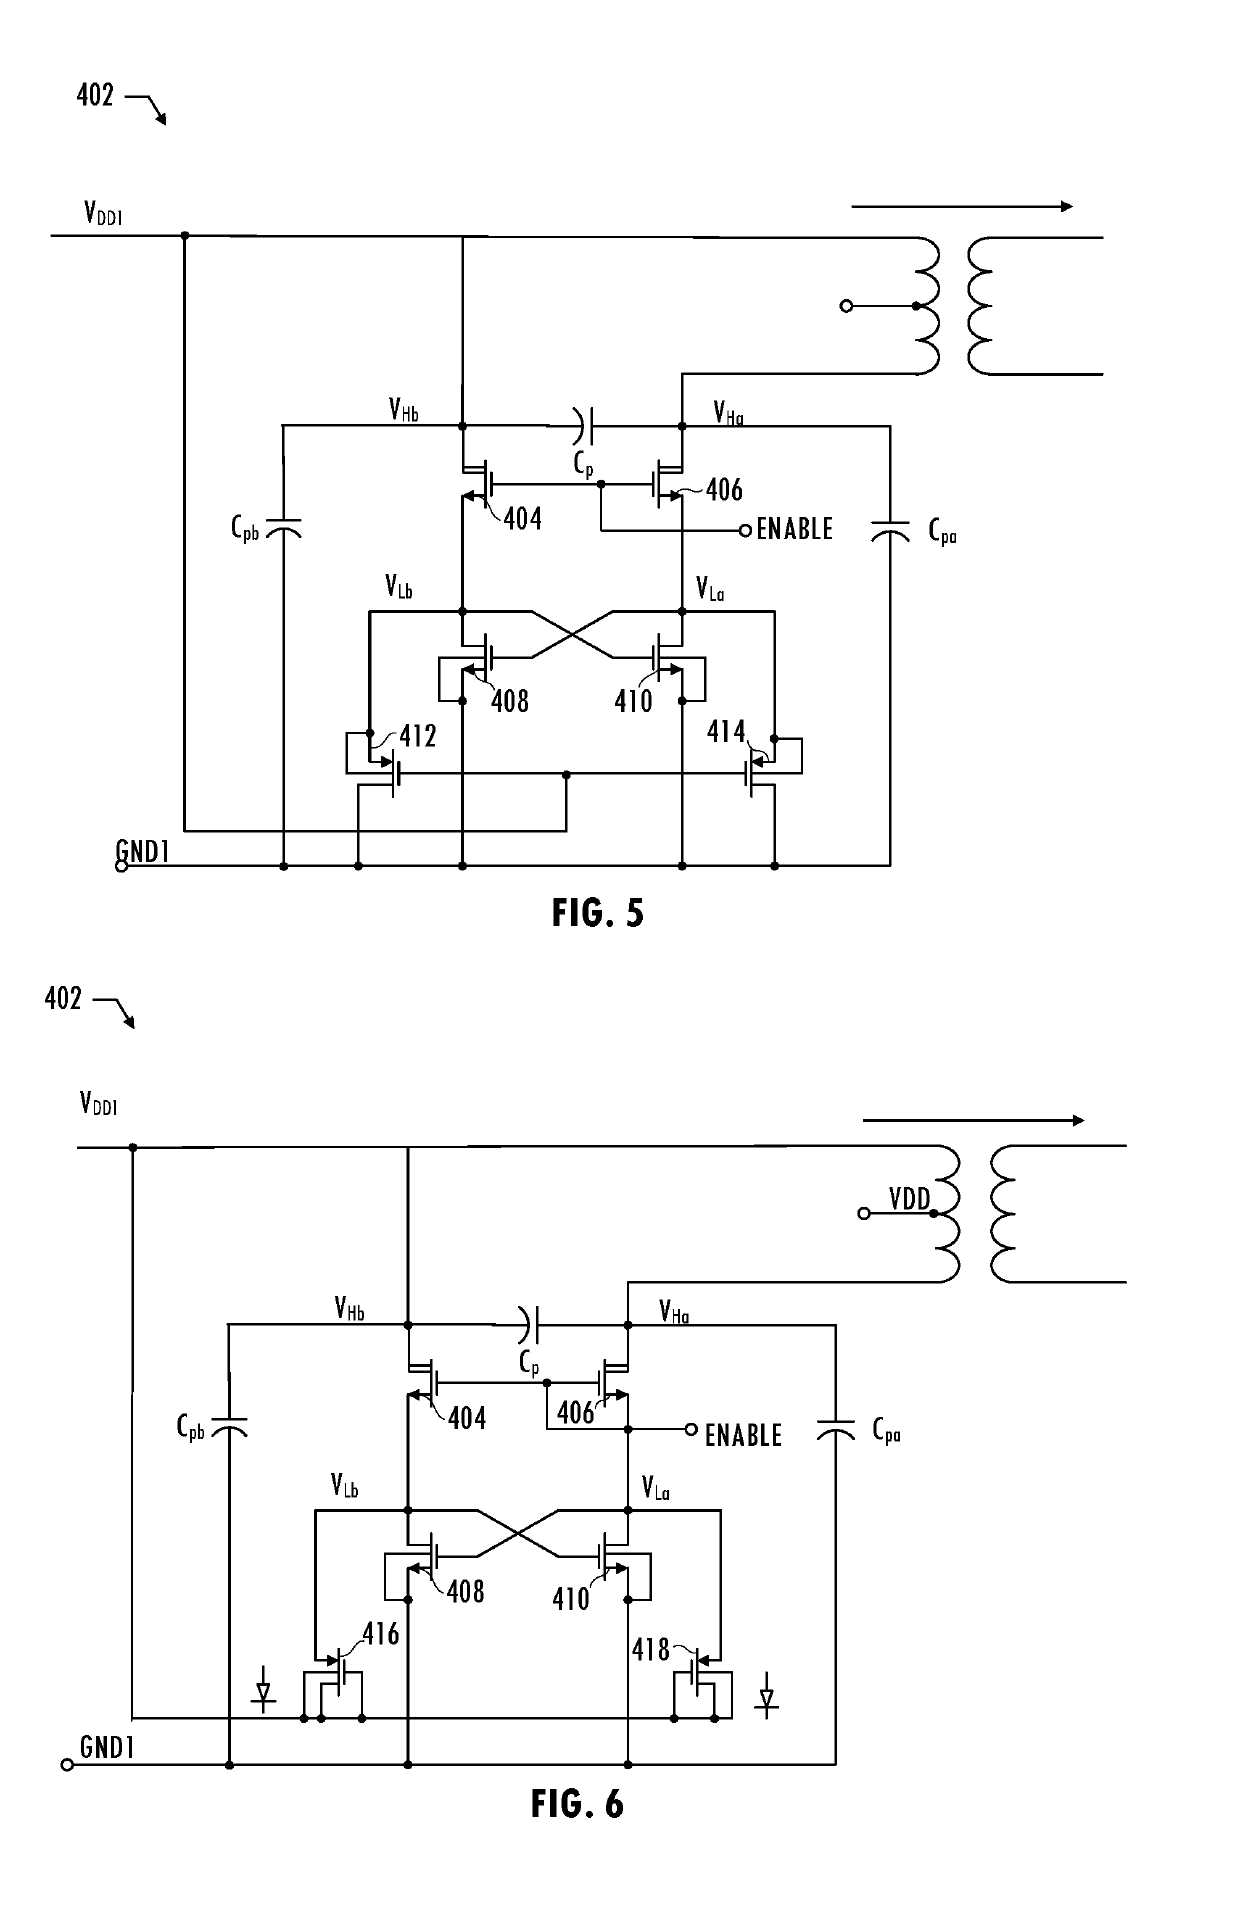 Isolated power transfer with integrated transformer and voltage control